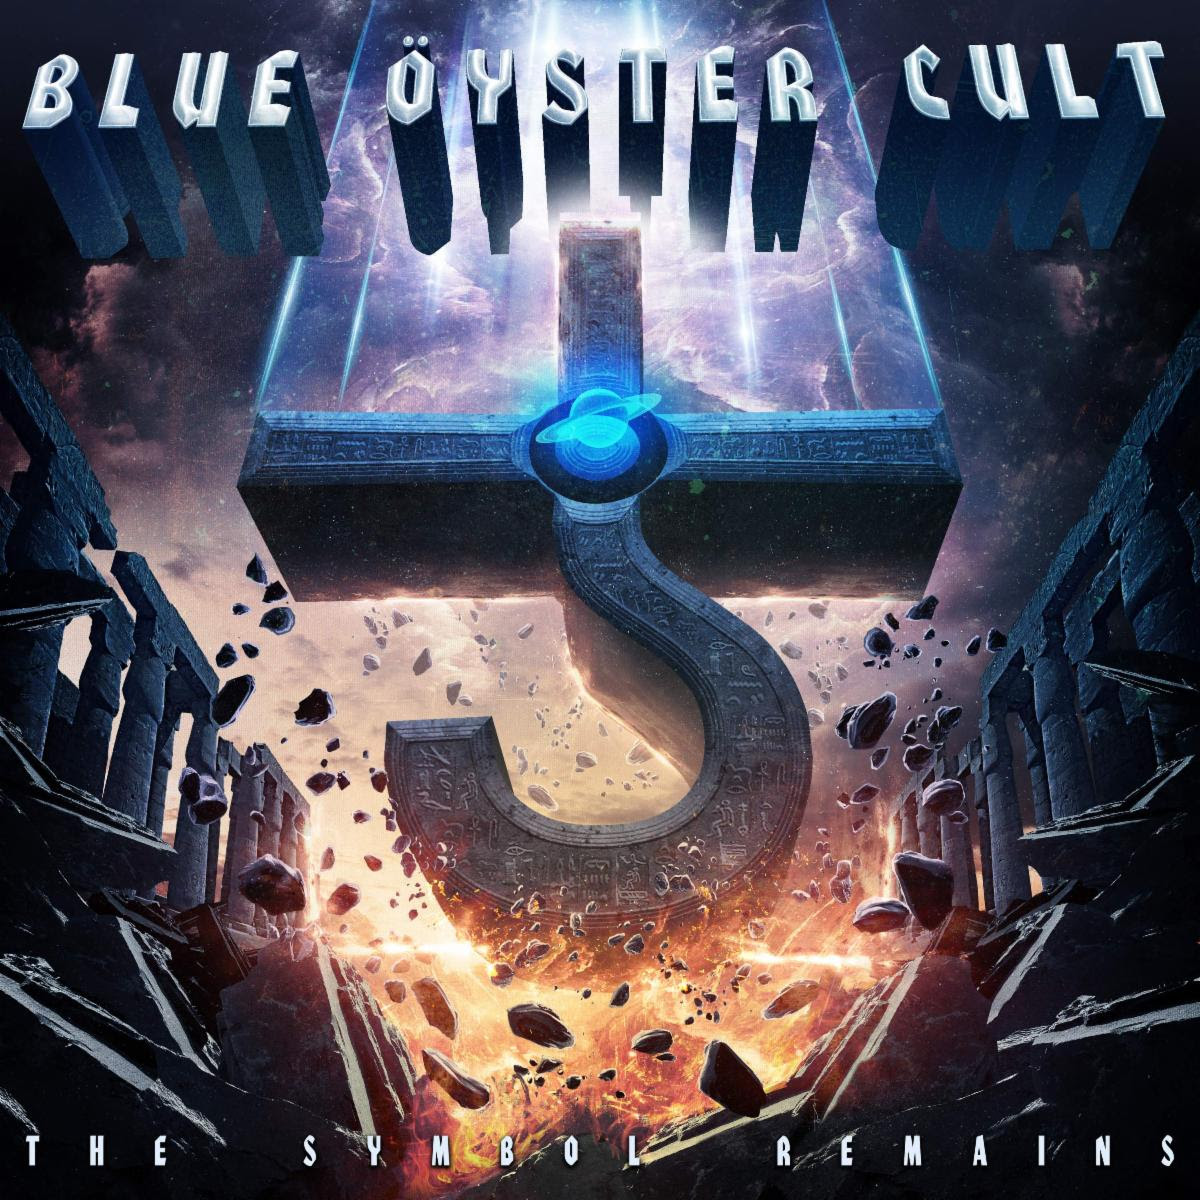 BLUE ÖYSTER CULT ANNOUNCE NEW STUDIO ALBUM "THE SYMBOL REMAINS" DUE OCTOBER 9, 2020 ON FRONTIERS MUSIC SRL